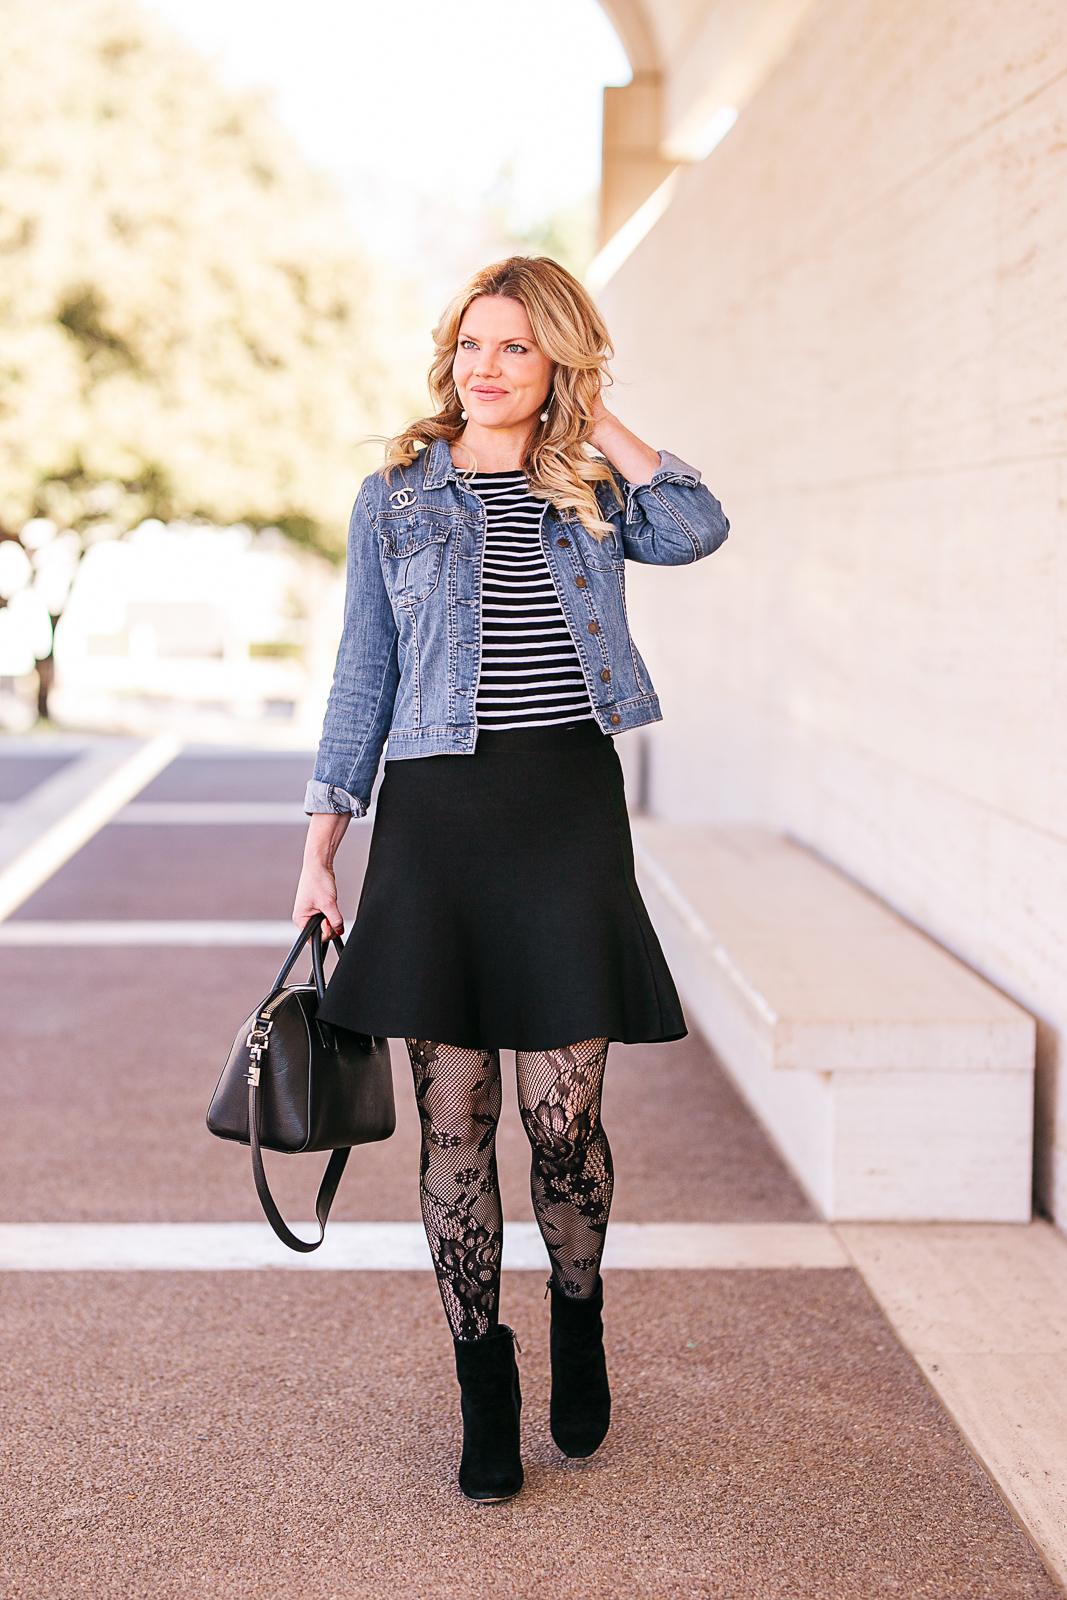 How to wear patterned tights - Fashionmylegs : The tights and